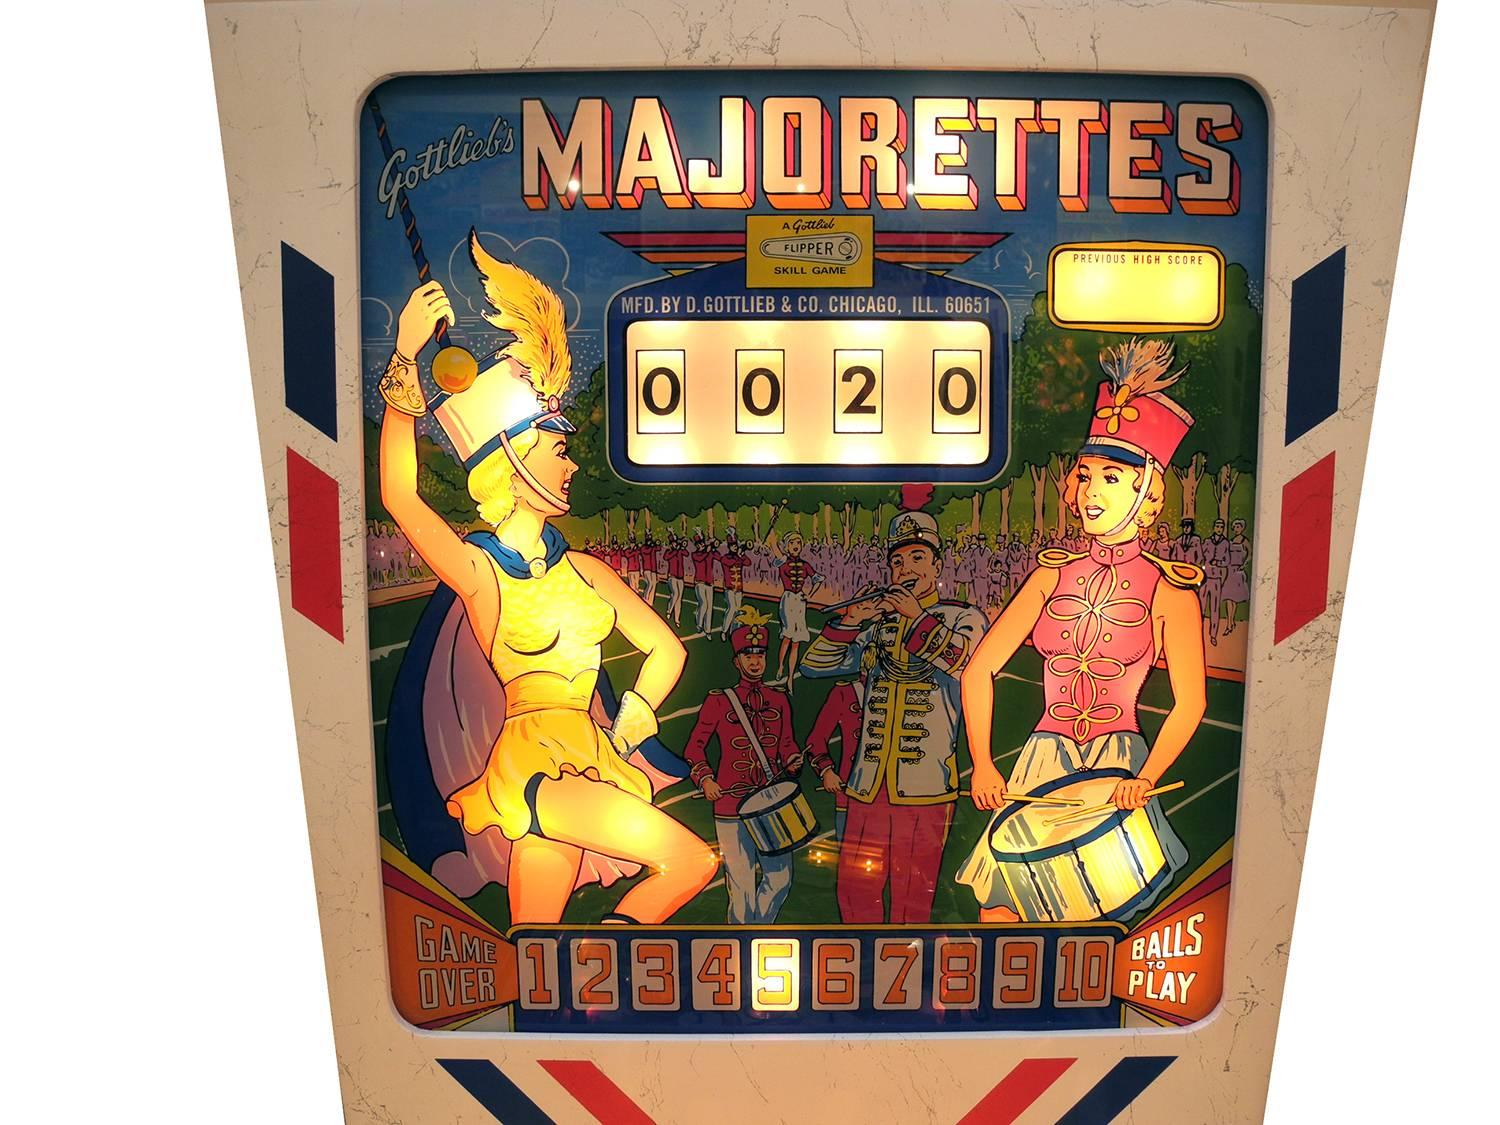 Name:Majorettes
Make: Gottlieb 
Date of release: August 1964
Designer: Wayne Neyens
Artwork: Roy Parker
Numbers made: 425 units
Model number 204
Serial number: 08254
Labour: in excess of 200 hours
Period of restoration: January – December